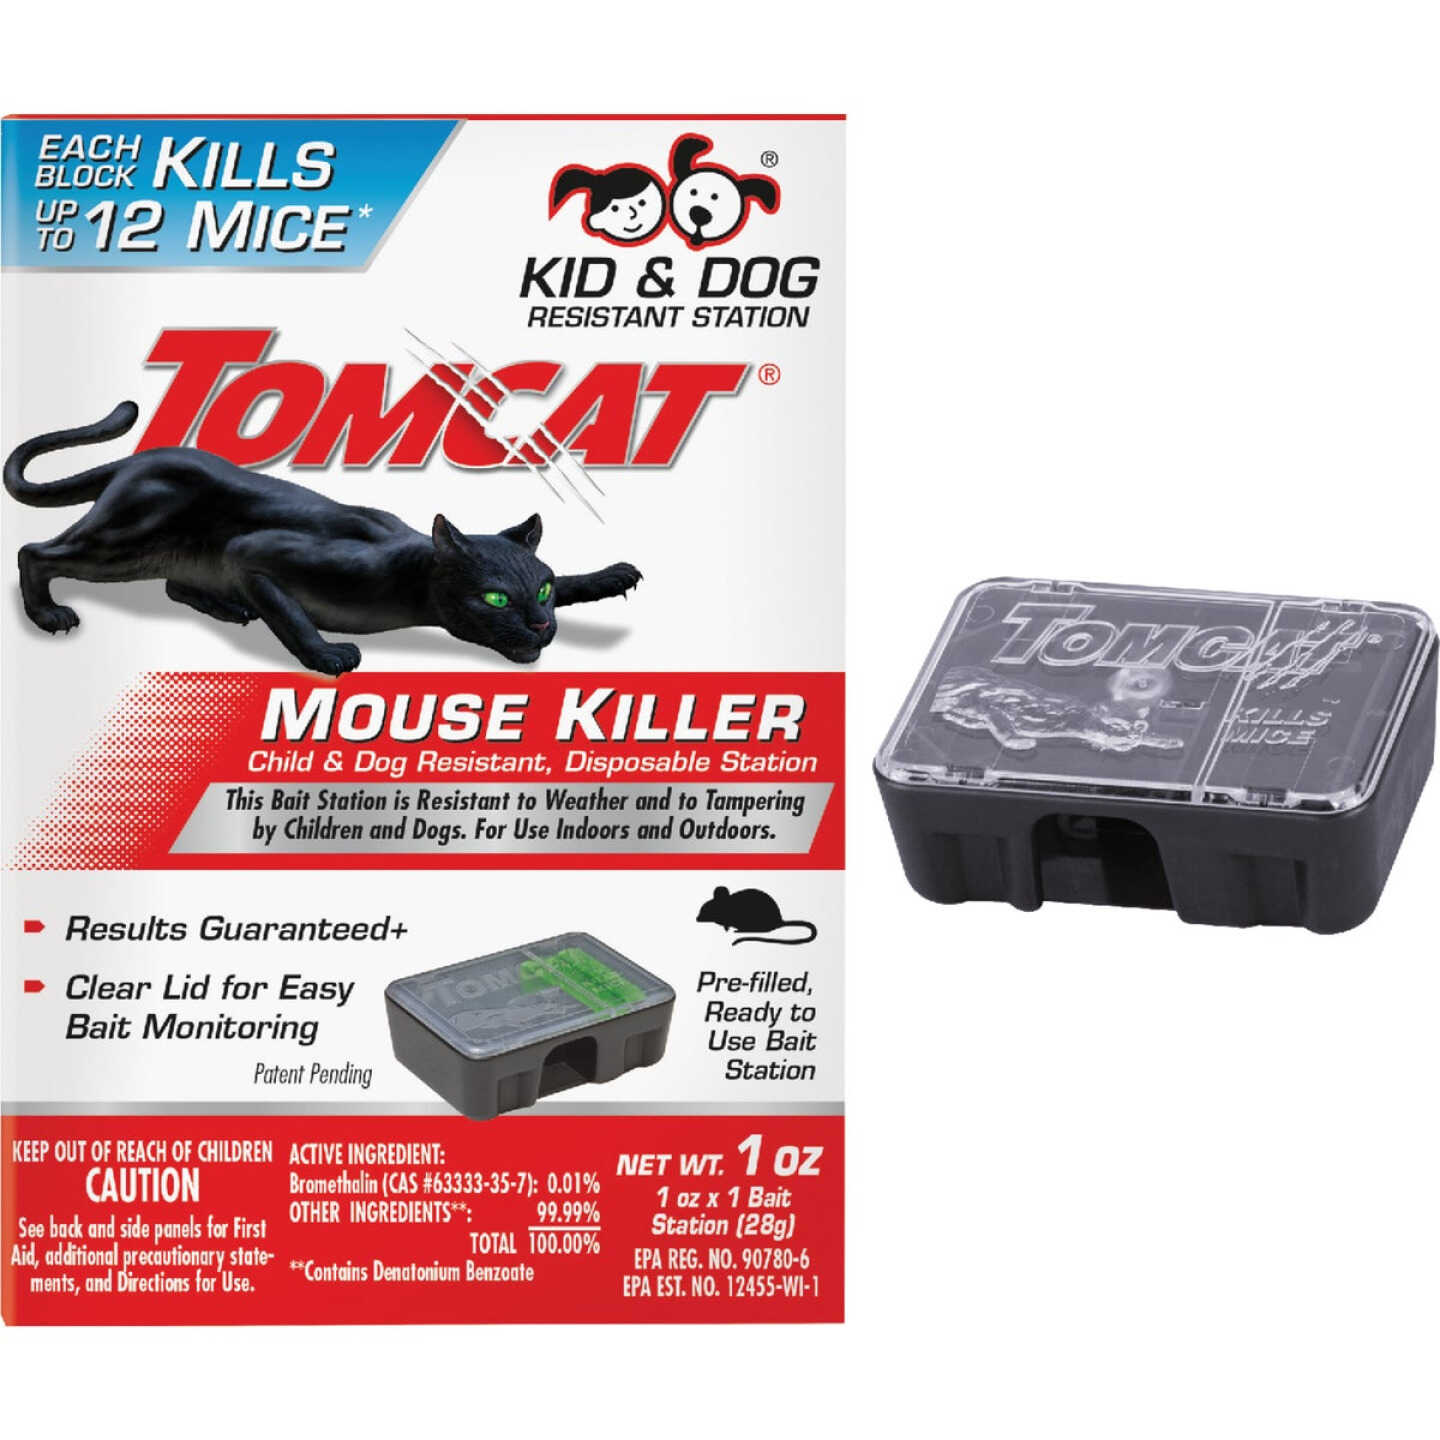  Tomcat Kill & Contain Mouse Trap, Never See a Dead